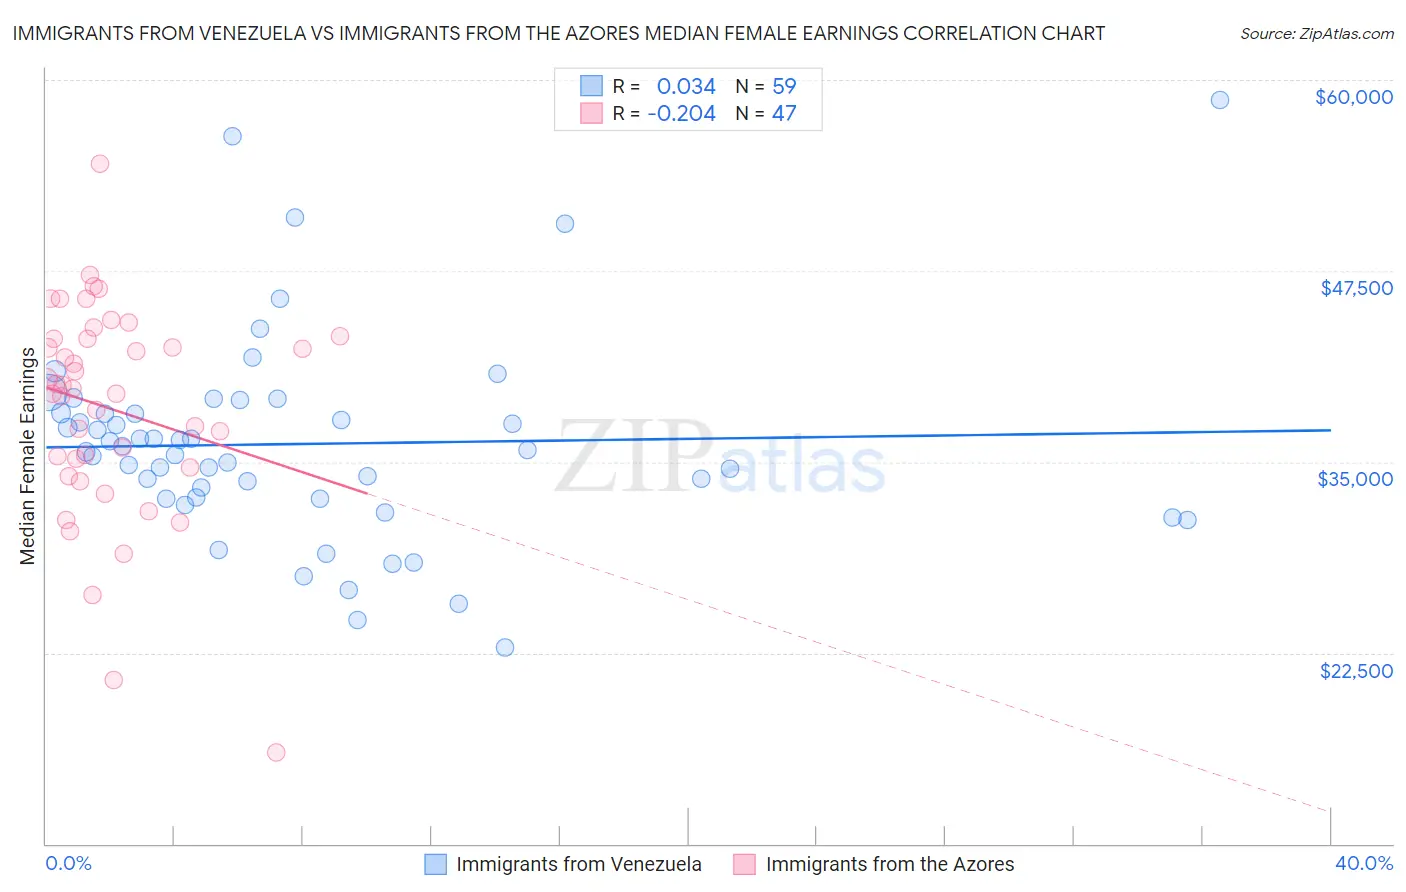 Immigrants from Venezuela vs Immigrants from the Azores Median Female Earnings